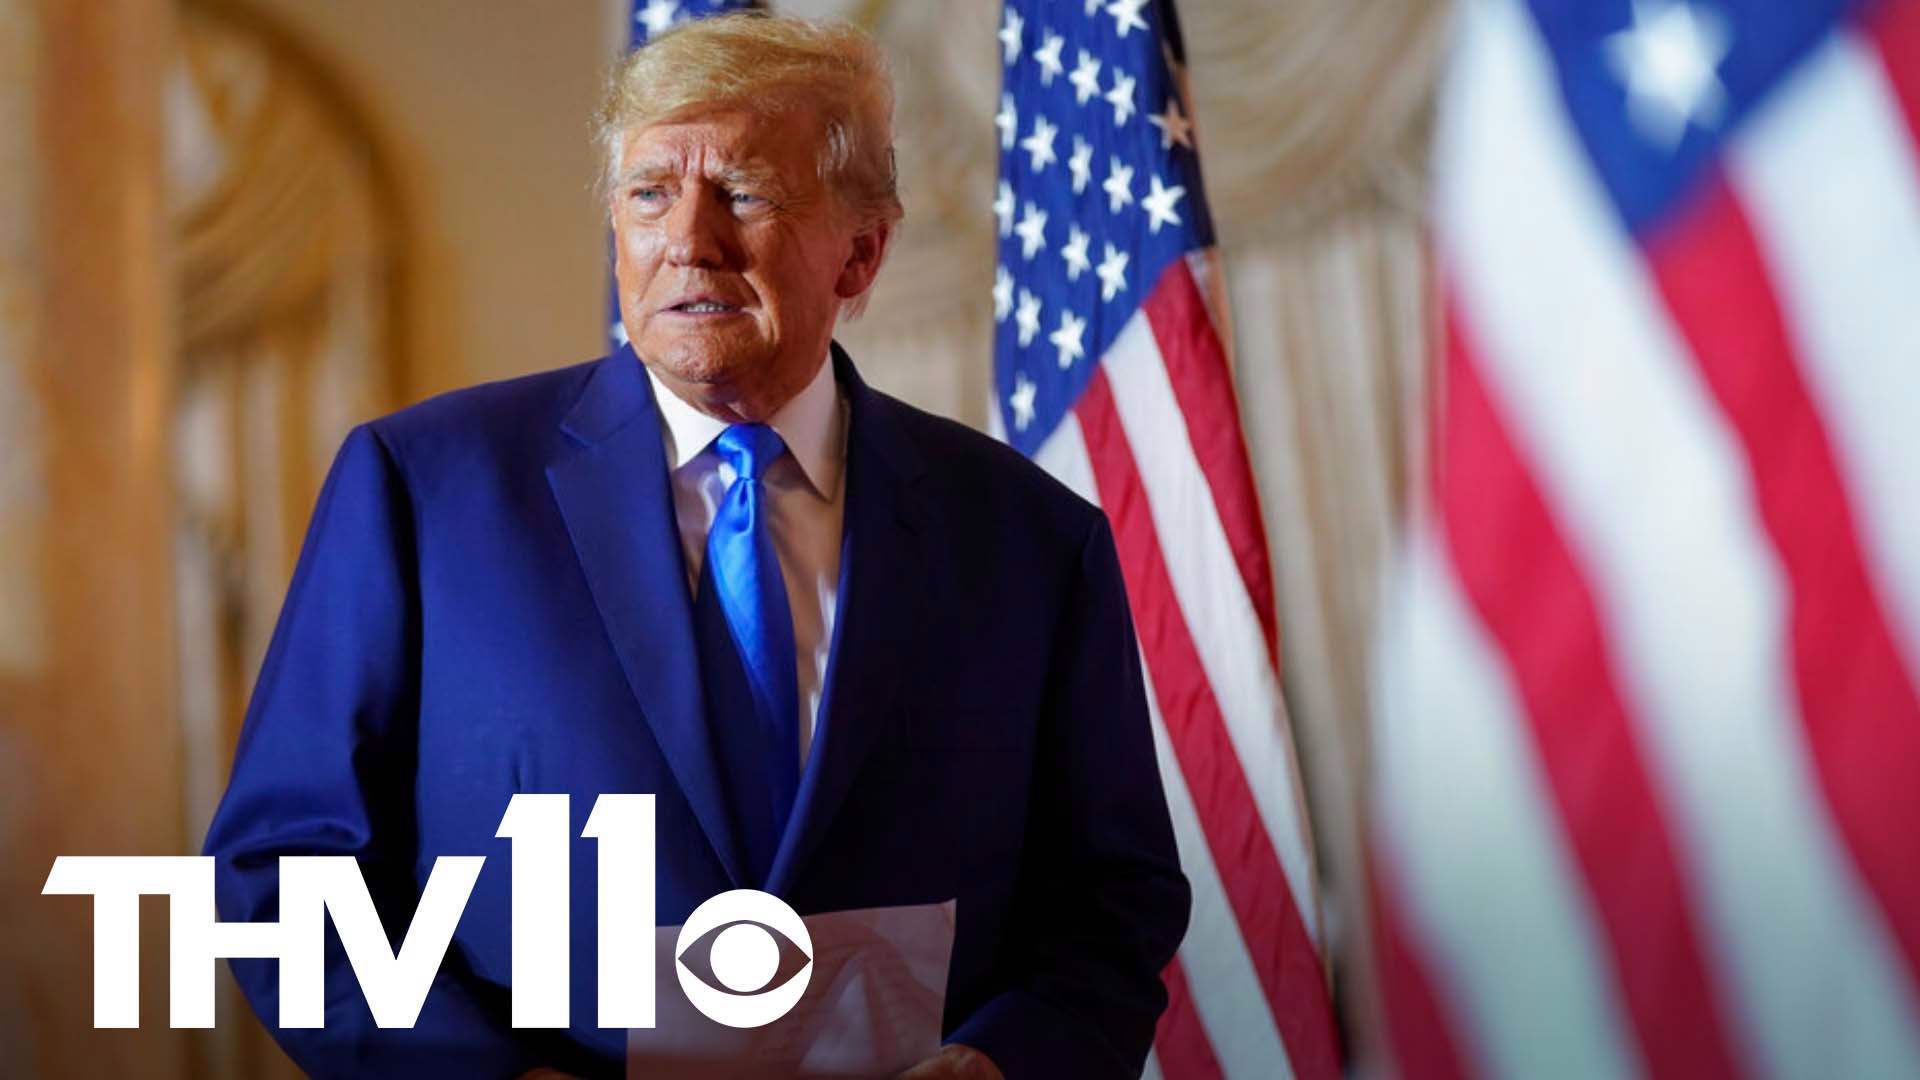 Former President Donald Trump is preparing to launch his third campaign for the White House.